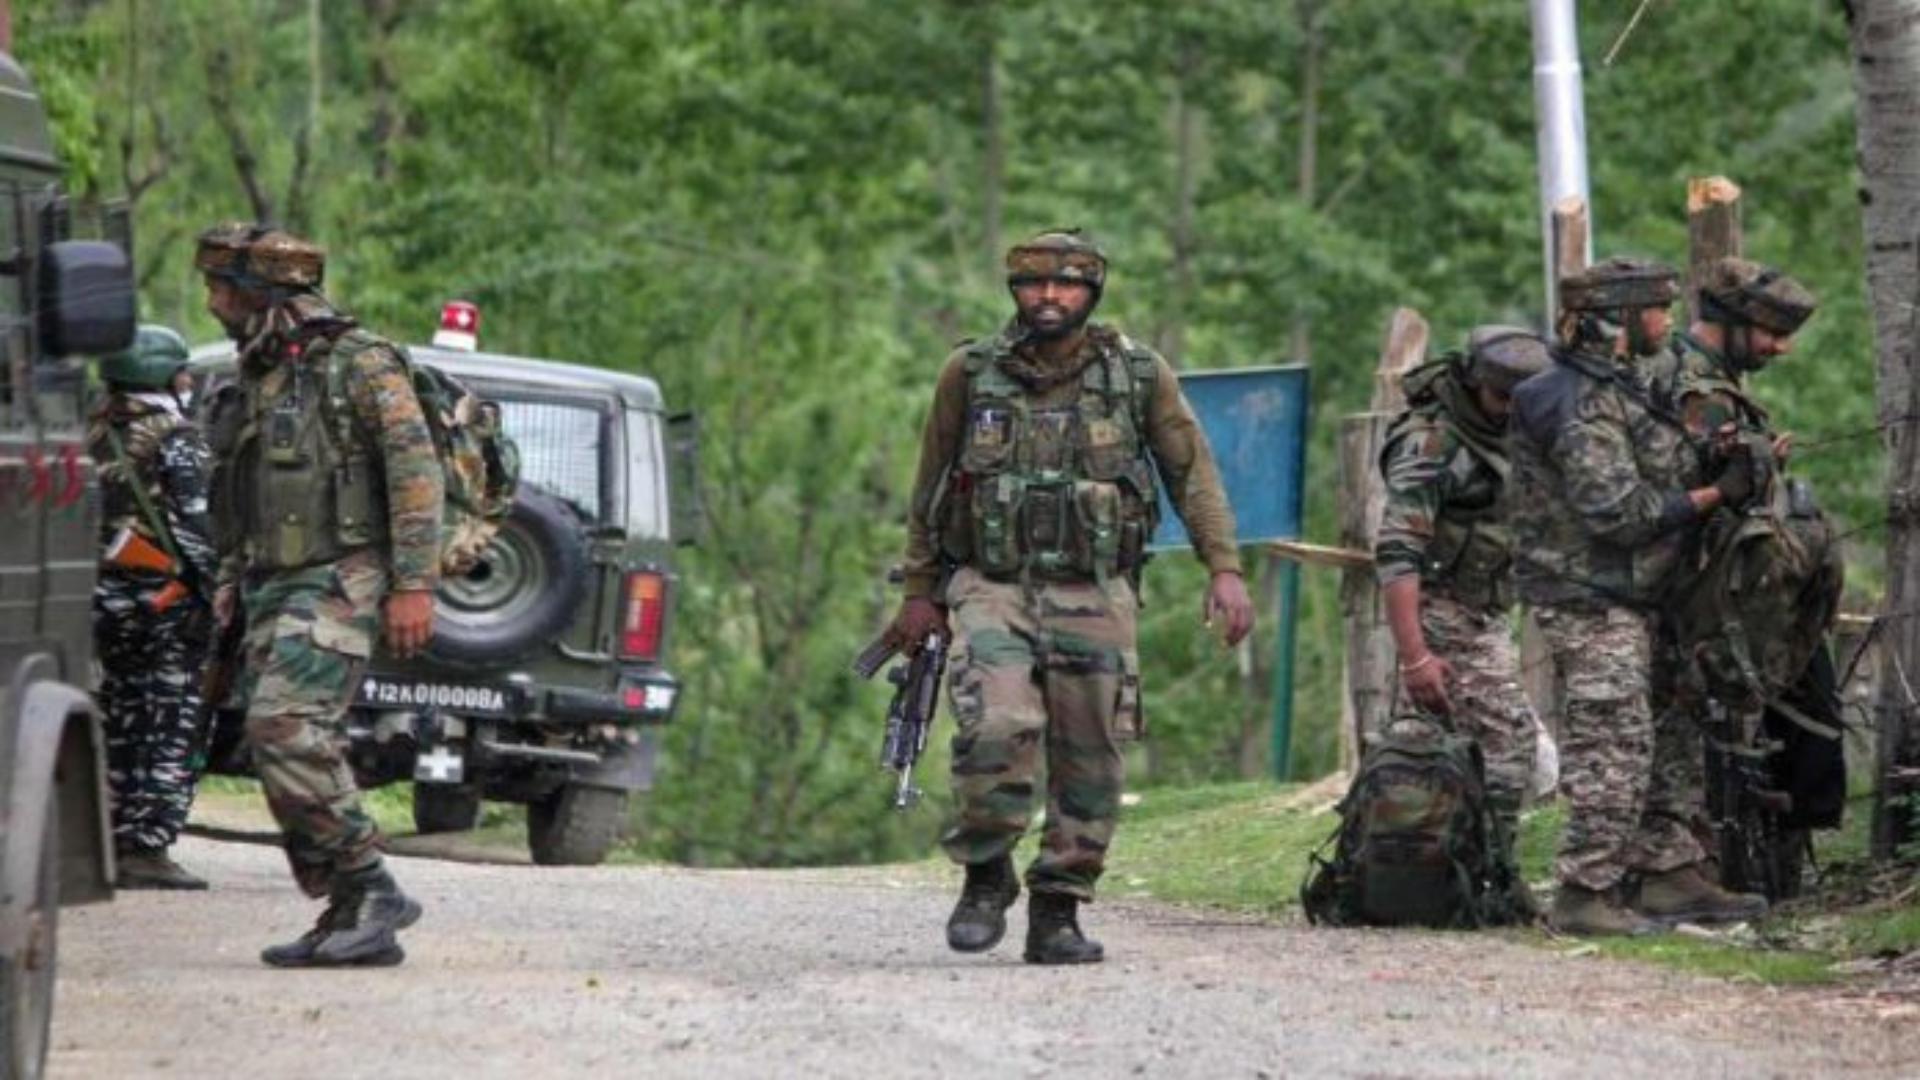 Security Forces Neutralize Terrorist in Encounter Operation in Pulwama, Kashmir